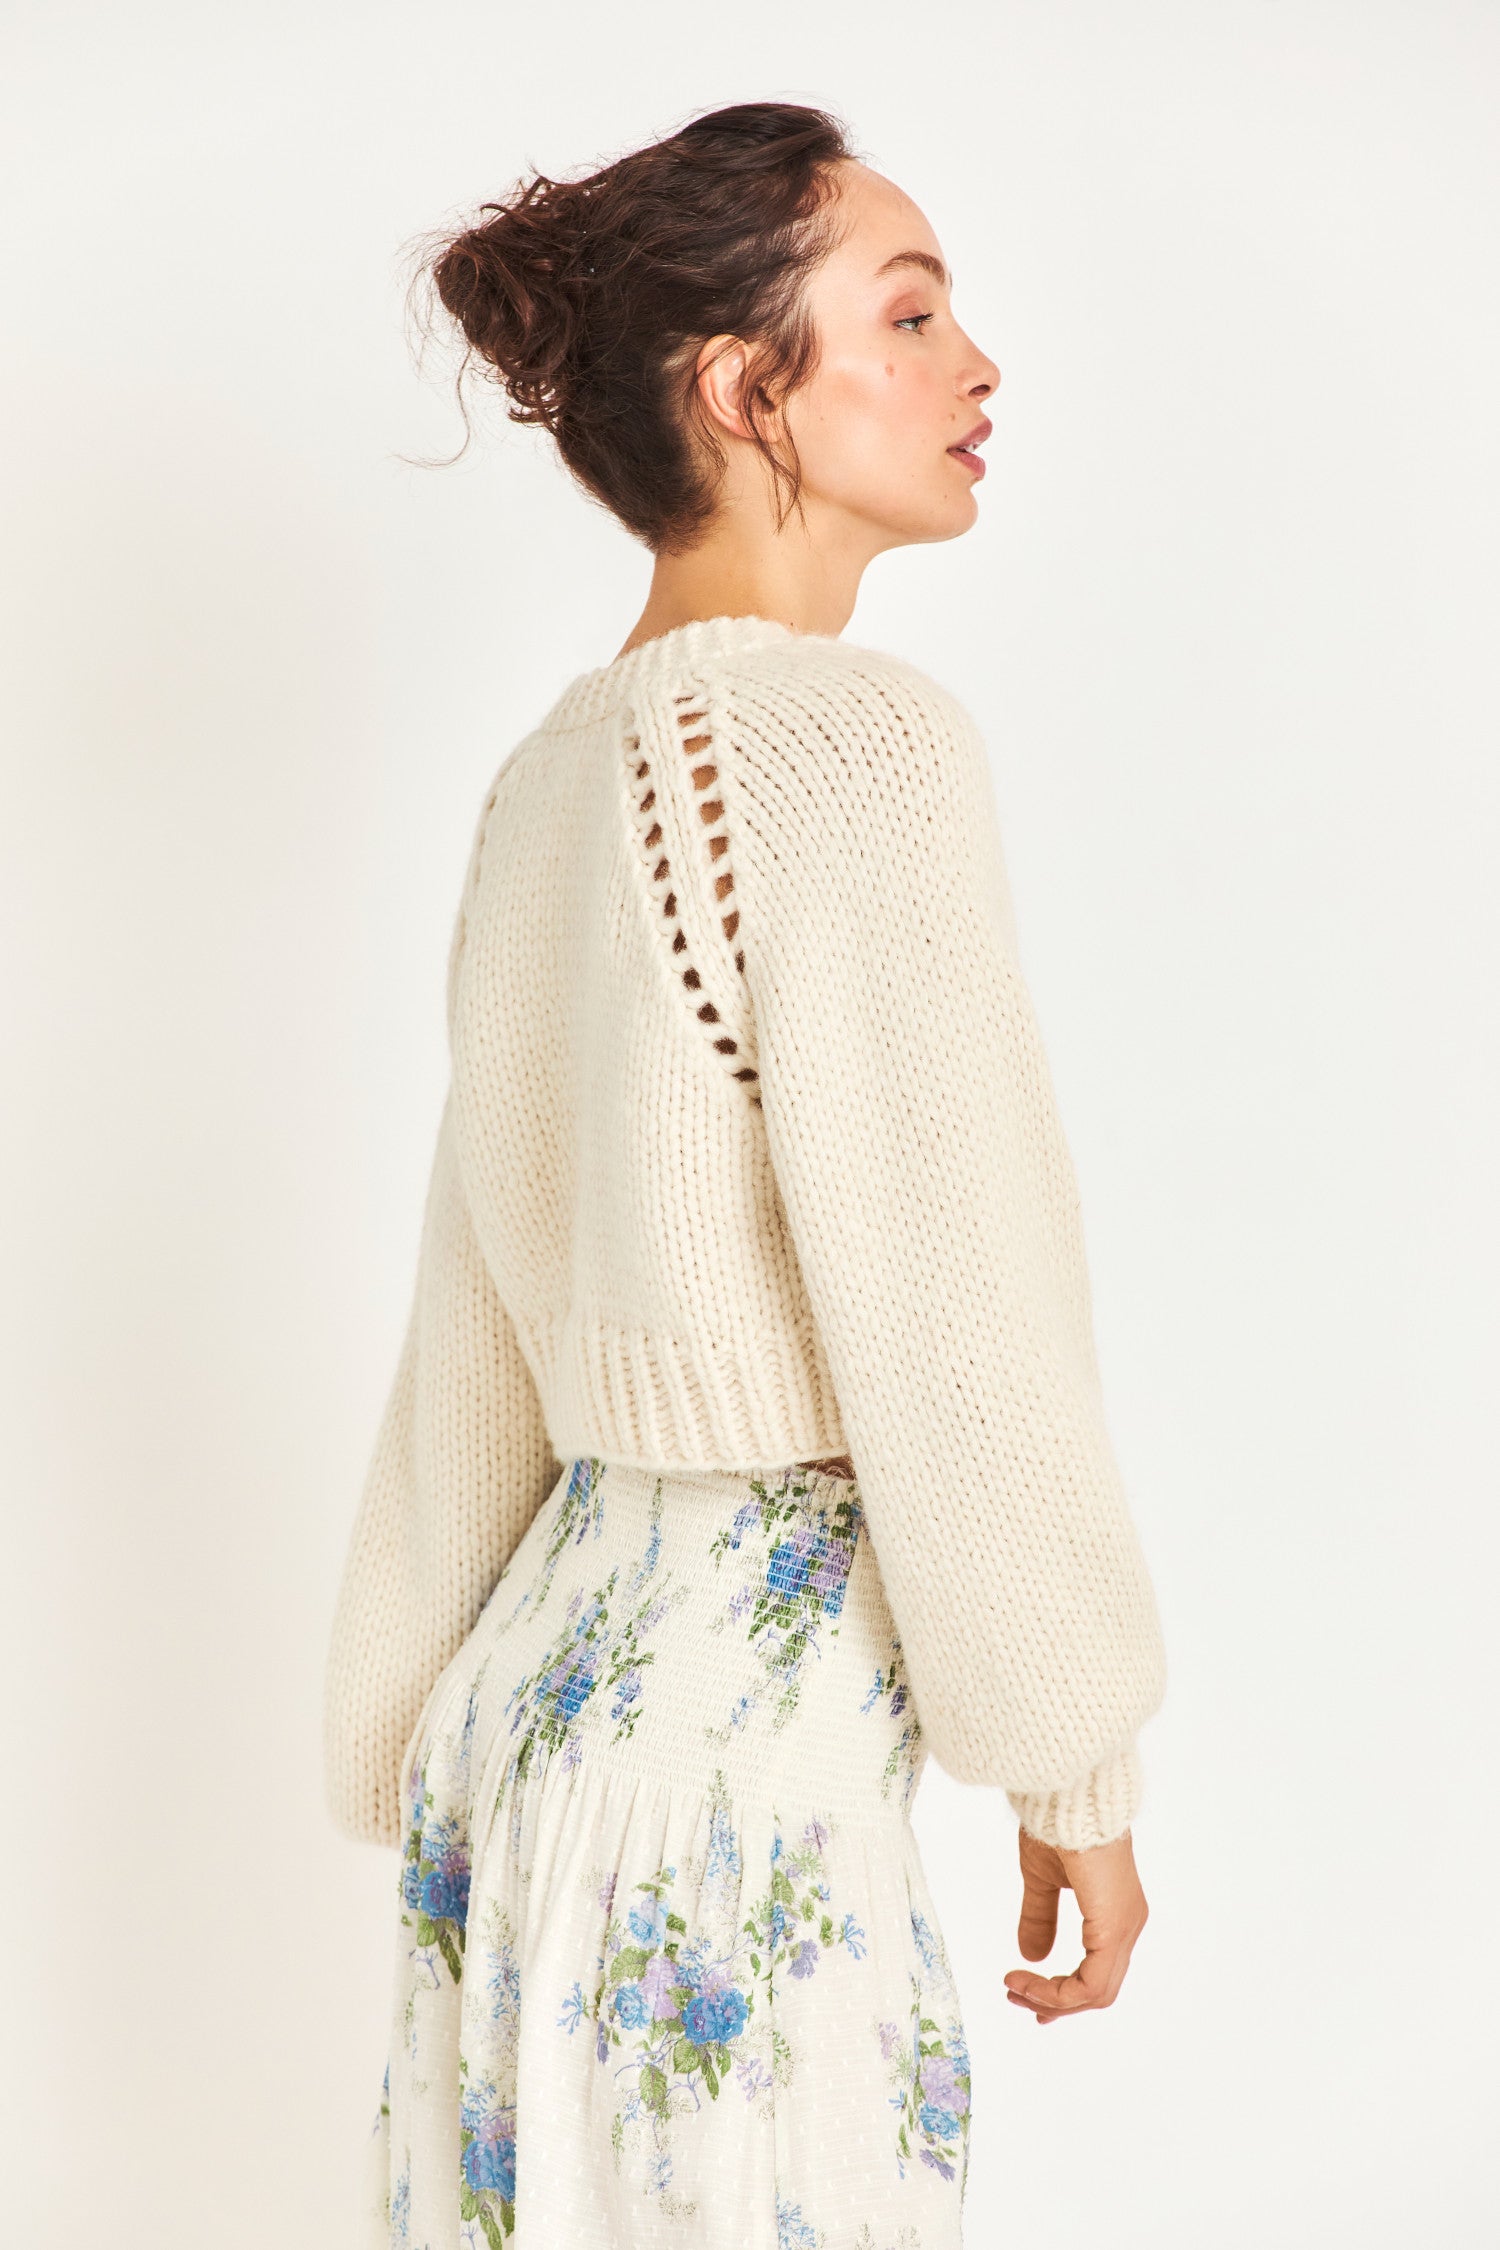 Marshe Crop Cardigan - Shop Knits| Sweaters Women\'s and